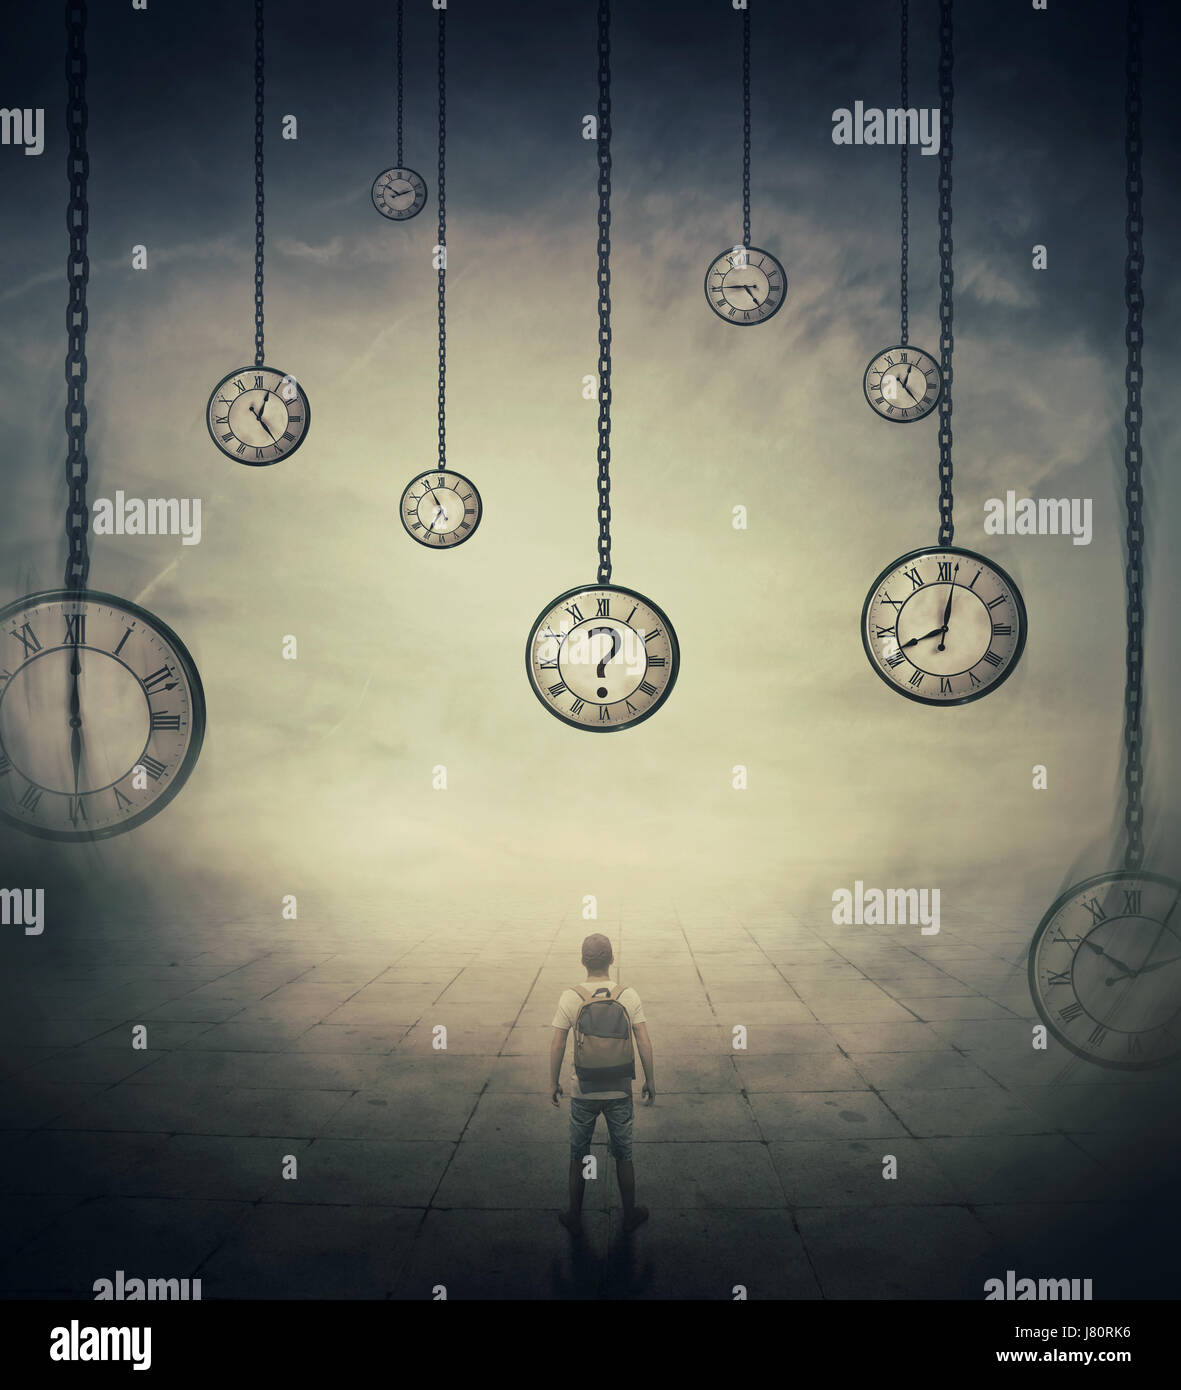 Surrealistic image with a man lost in time, standing in a foggy street in front of huge clocks set to different times. Hour perception and time travel Stock Photo